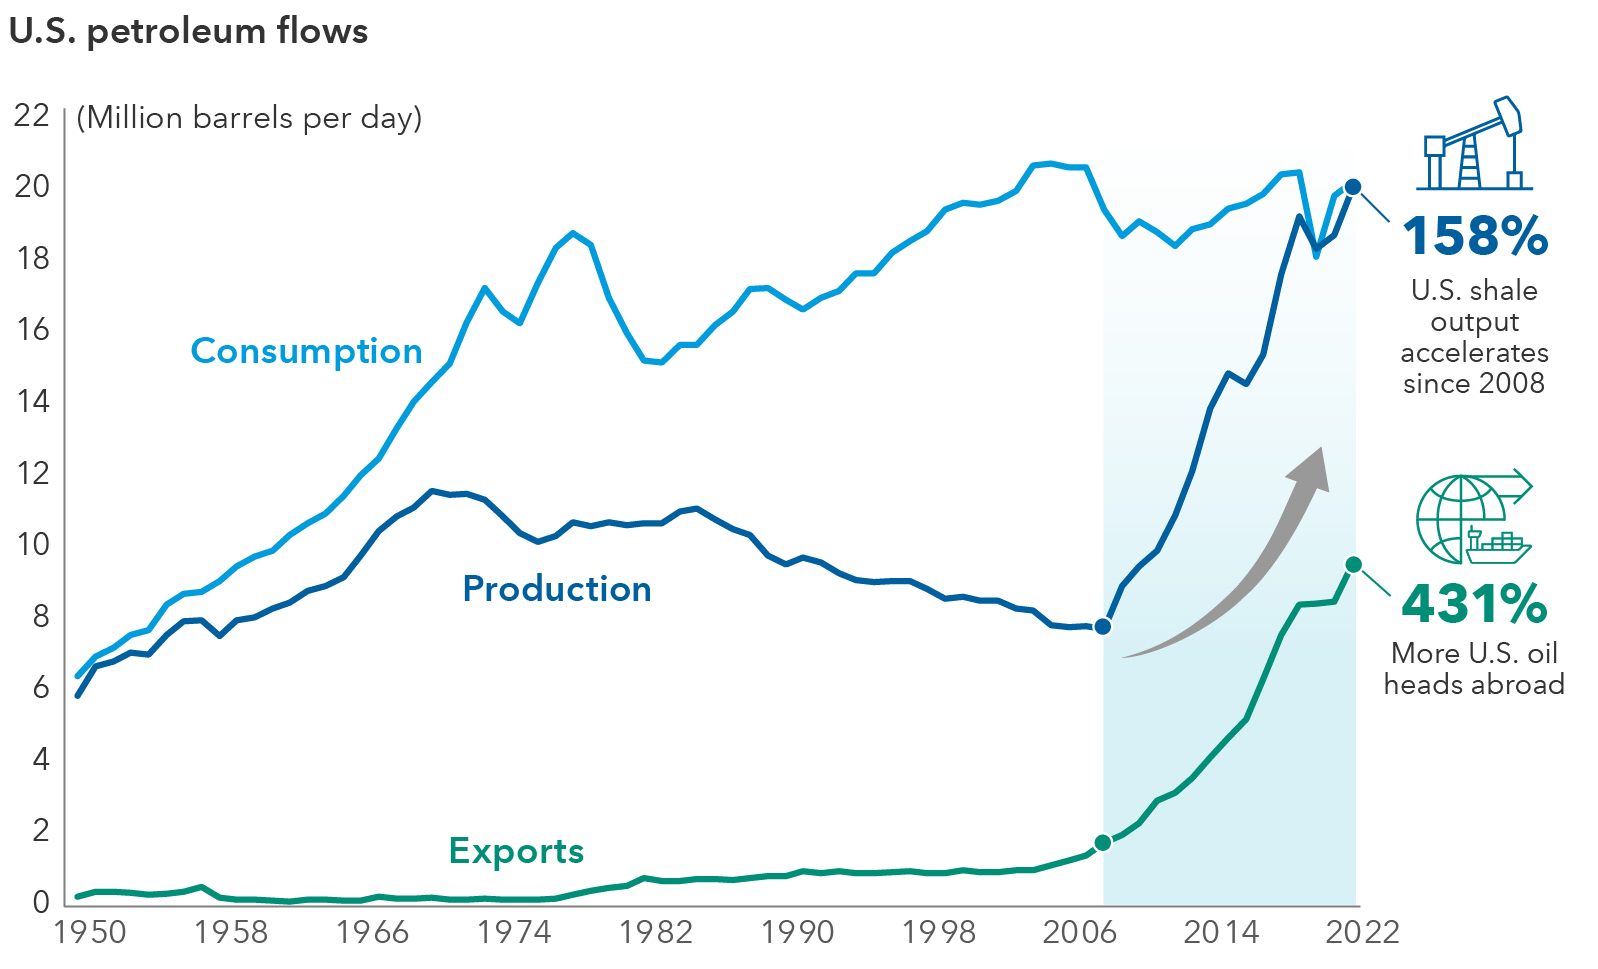 The graph above depicts the volume of U.S. crude oil consumption, exports and production from 1950 to 2022. The y-axis represents millions of barrels of oil per day while the x-axis shows the timeframe in eight-year increments from 1950 until 2022. Consumption increases from 1950 until it dips in the early 1980s, before picking back up again. Production grows from 1950 until about the late 1980s, where it declines and doesn’t rise again until about 2009, when it experiences a rapid growth rate. Exports remain steady until they gain steam in the mid-2000s and continue to climb upward. There are two icons on the right side of the image — an oil drilling rig and an oil tanker. Under the oil drilling rig is a note that U.S. production has increased 158% from 2008 until 2022, with text that says, “U.S. shale output accelerates since 2008.” Below, there’s an image of an oil shipping tanker with a globe, showing a 431% increase in exports from 2008 until 2022. The text below the icon reads, “More U.S. oil heads abroad.”